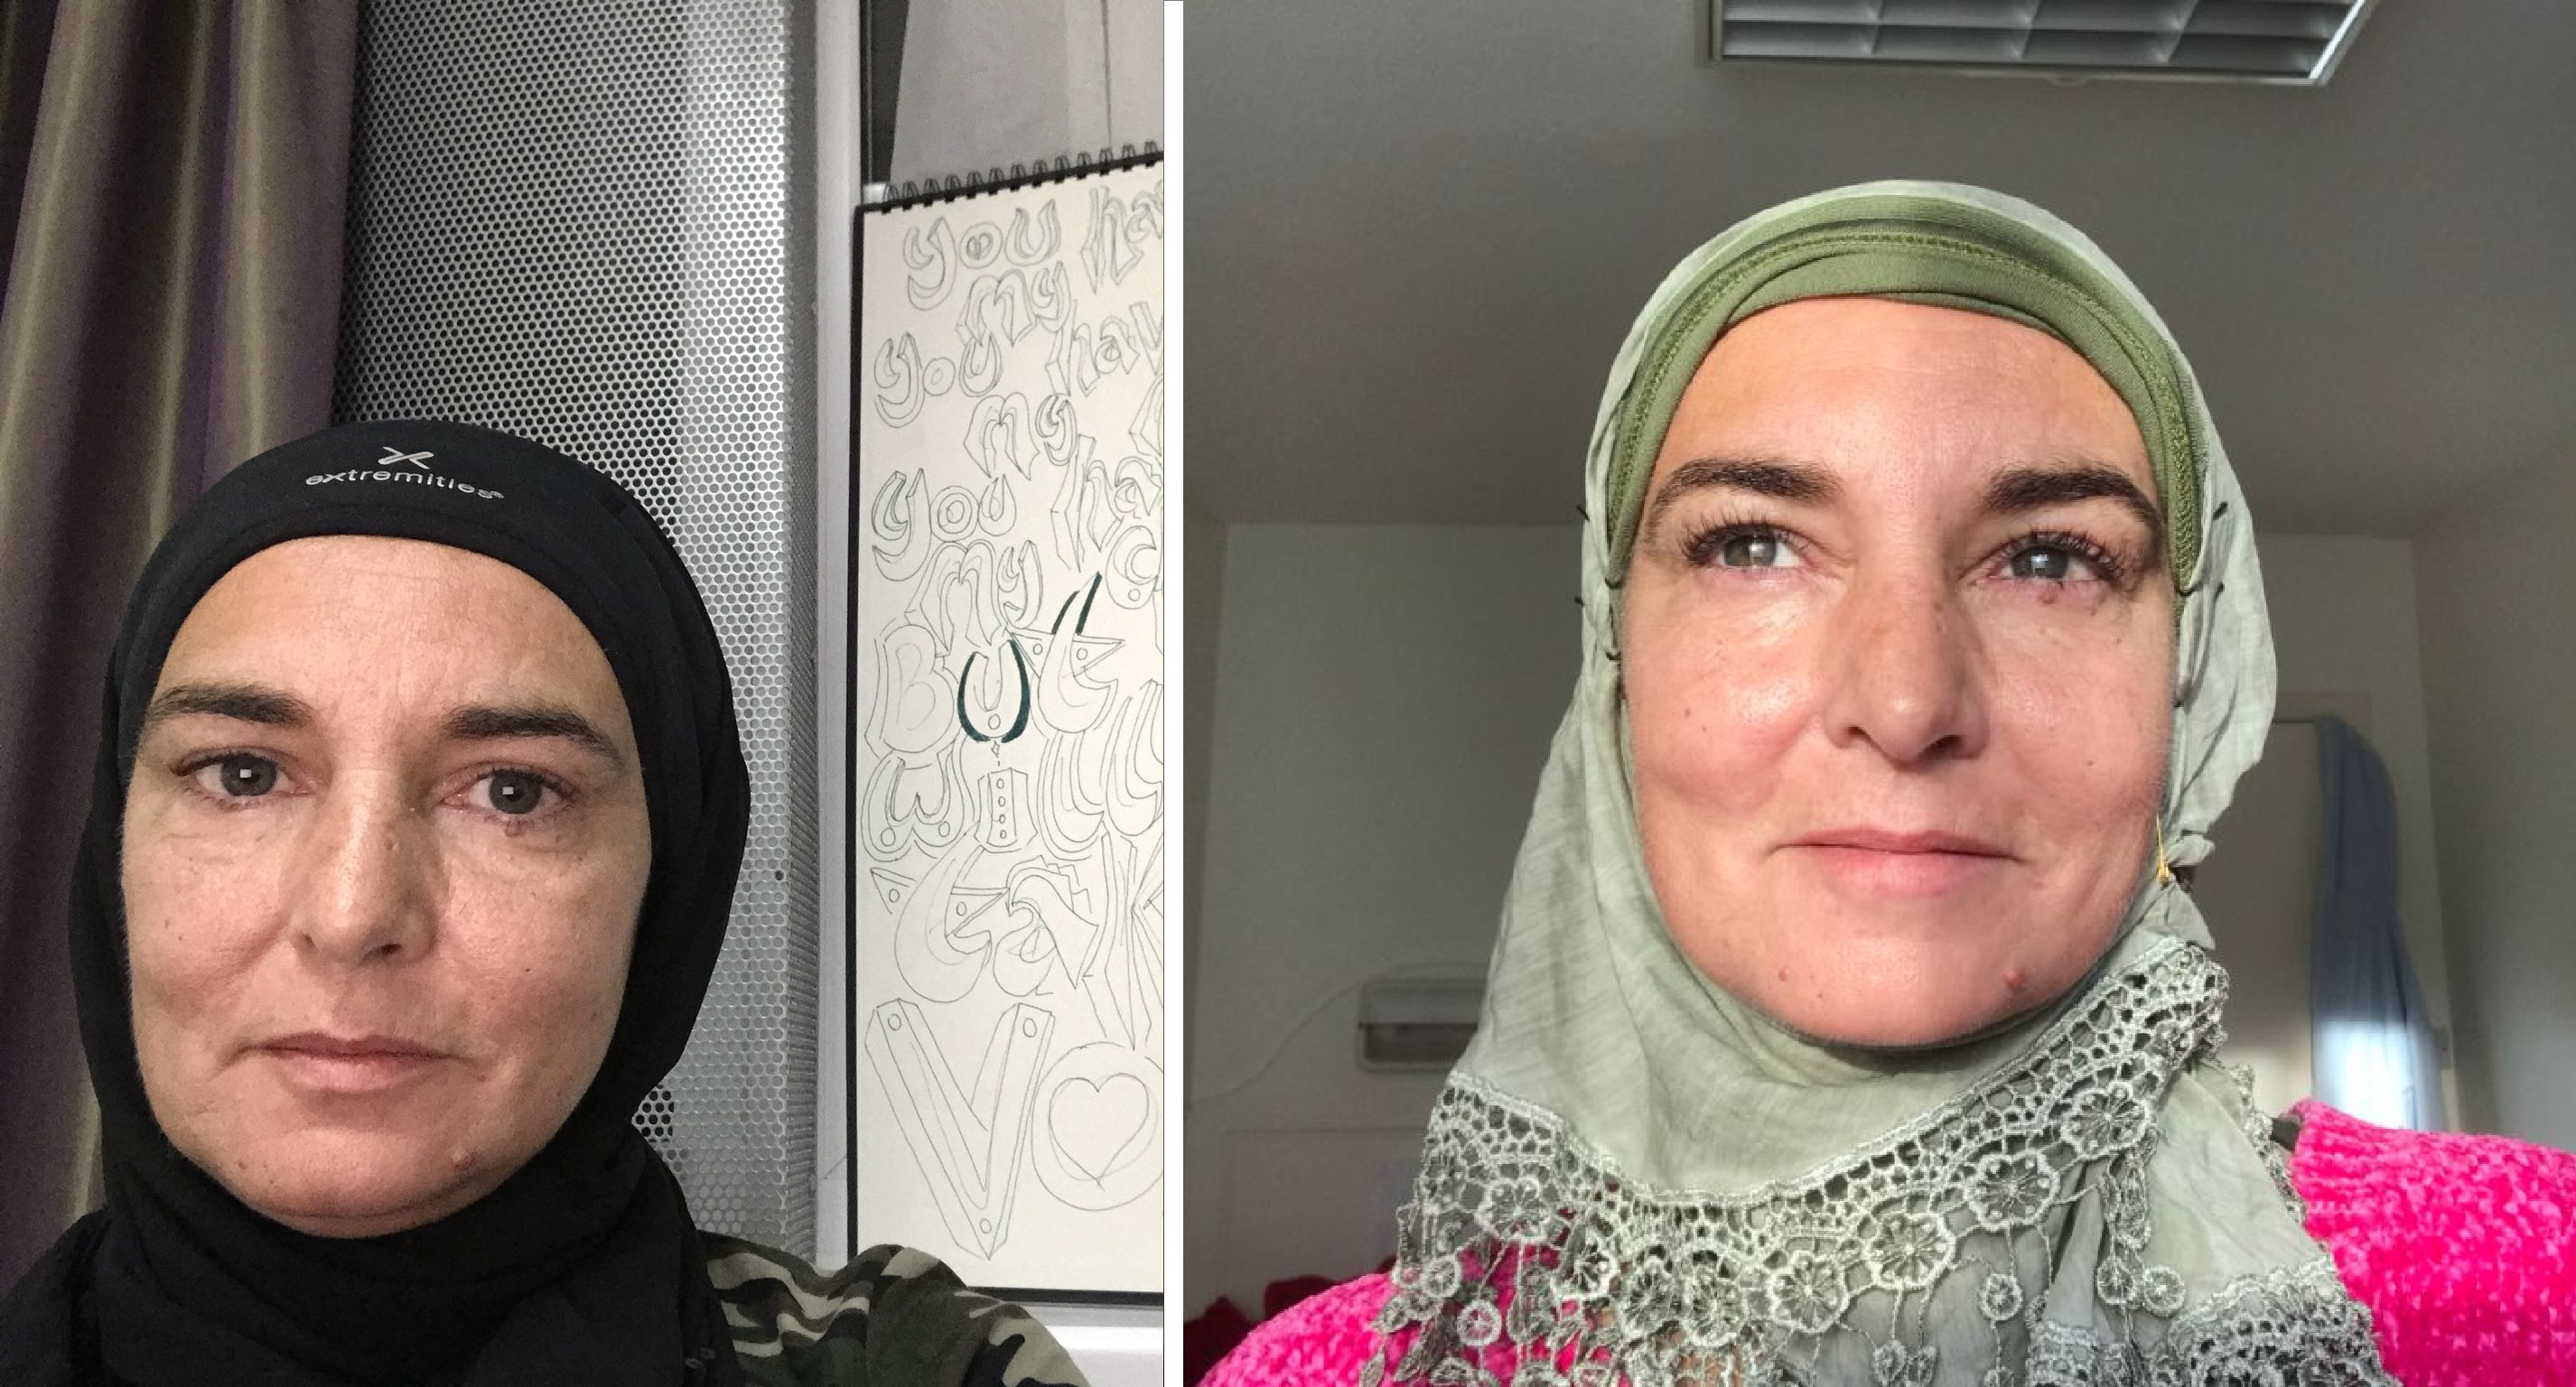 Sinead O’Connor Converts to Islam. Gives Herself This New Name…